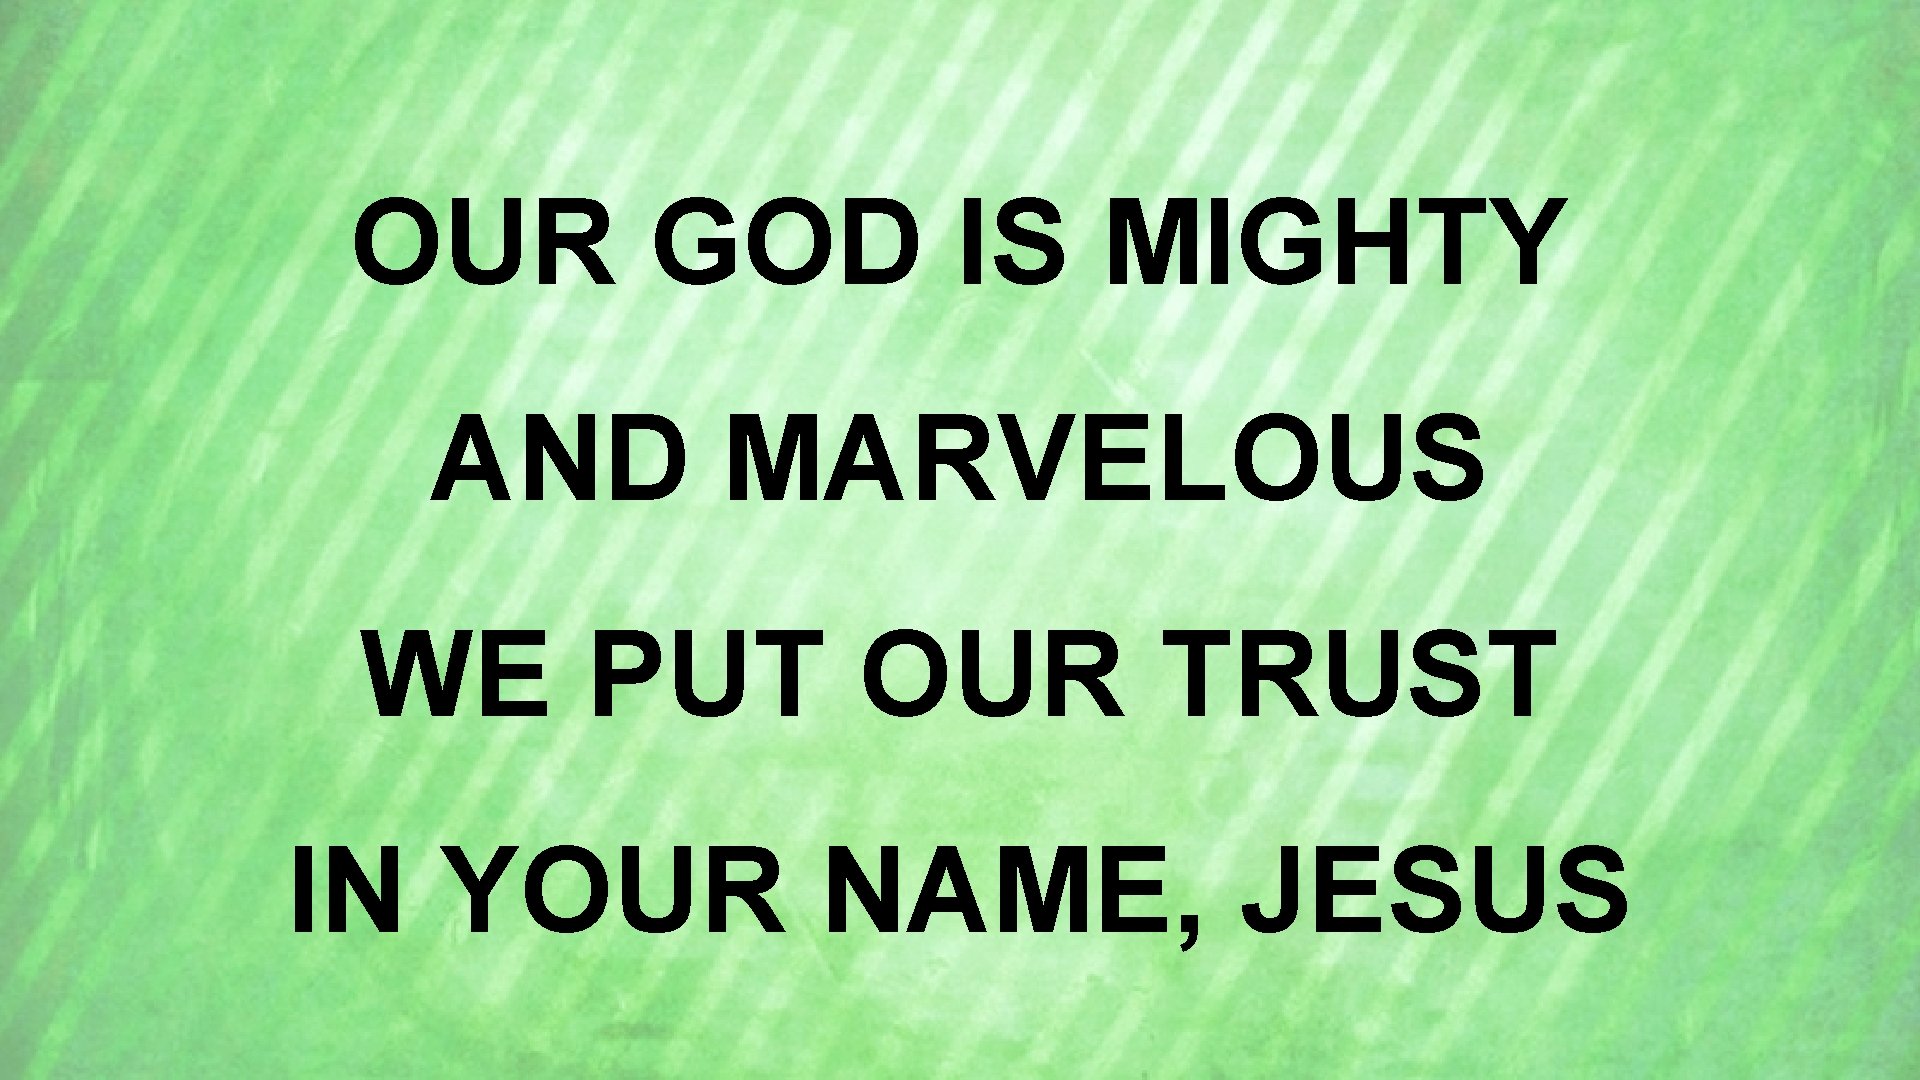 OUR GOD IS MIGHTY AND MARVELOUS WE PUT OUR TRUST IN YOUR NAME, JESUS